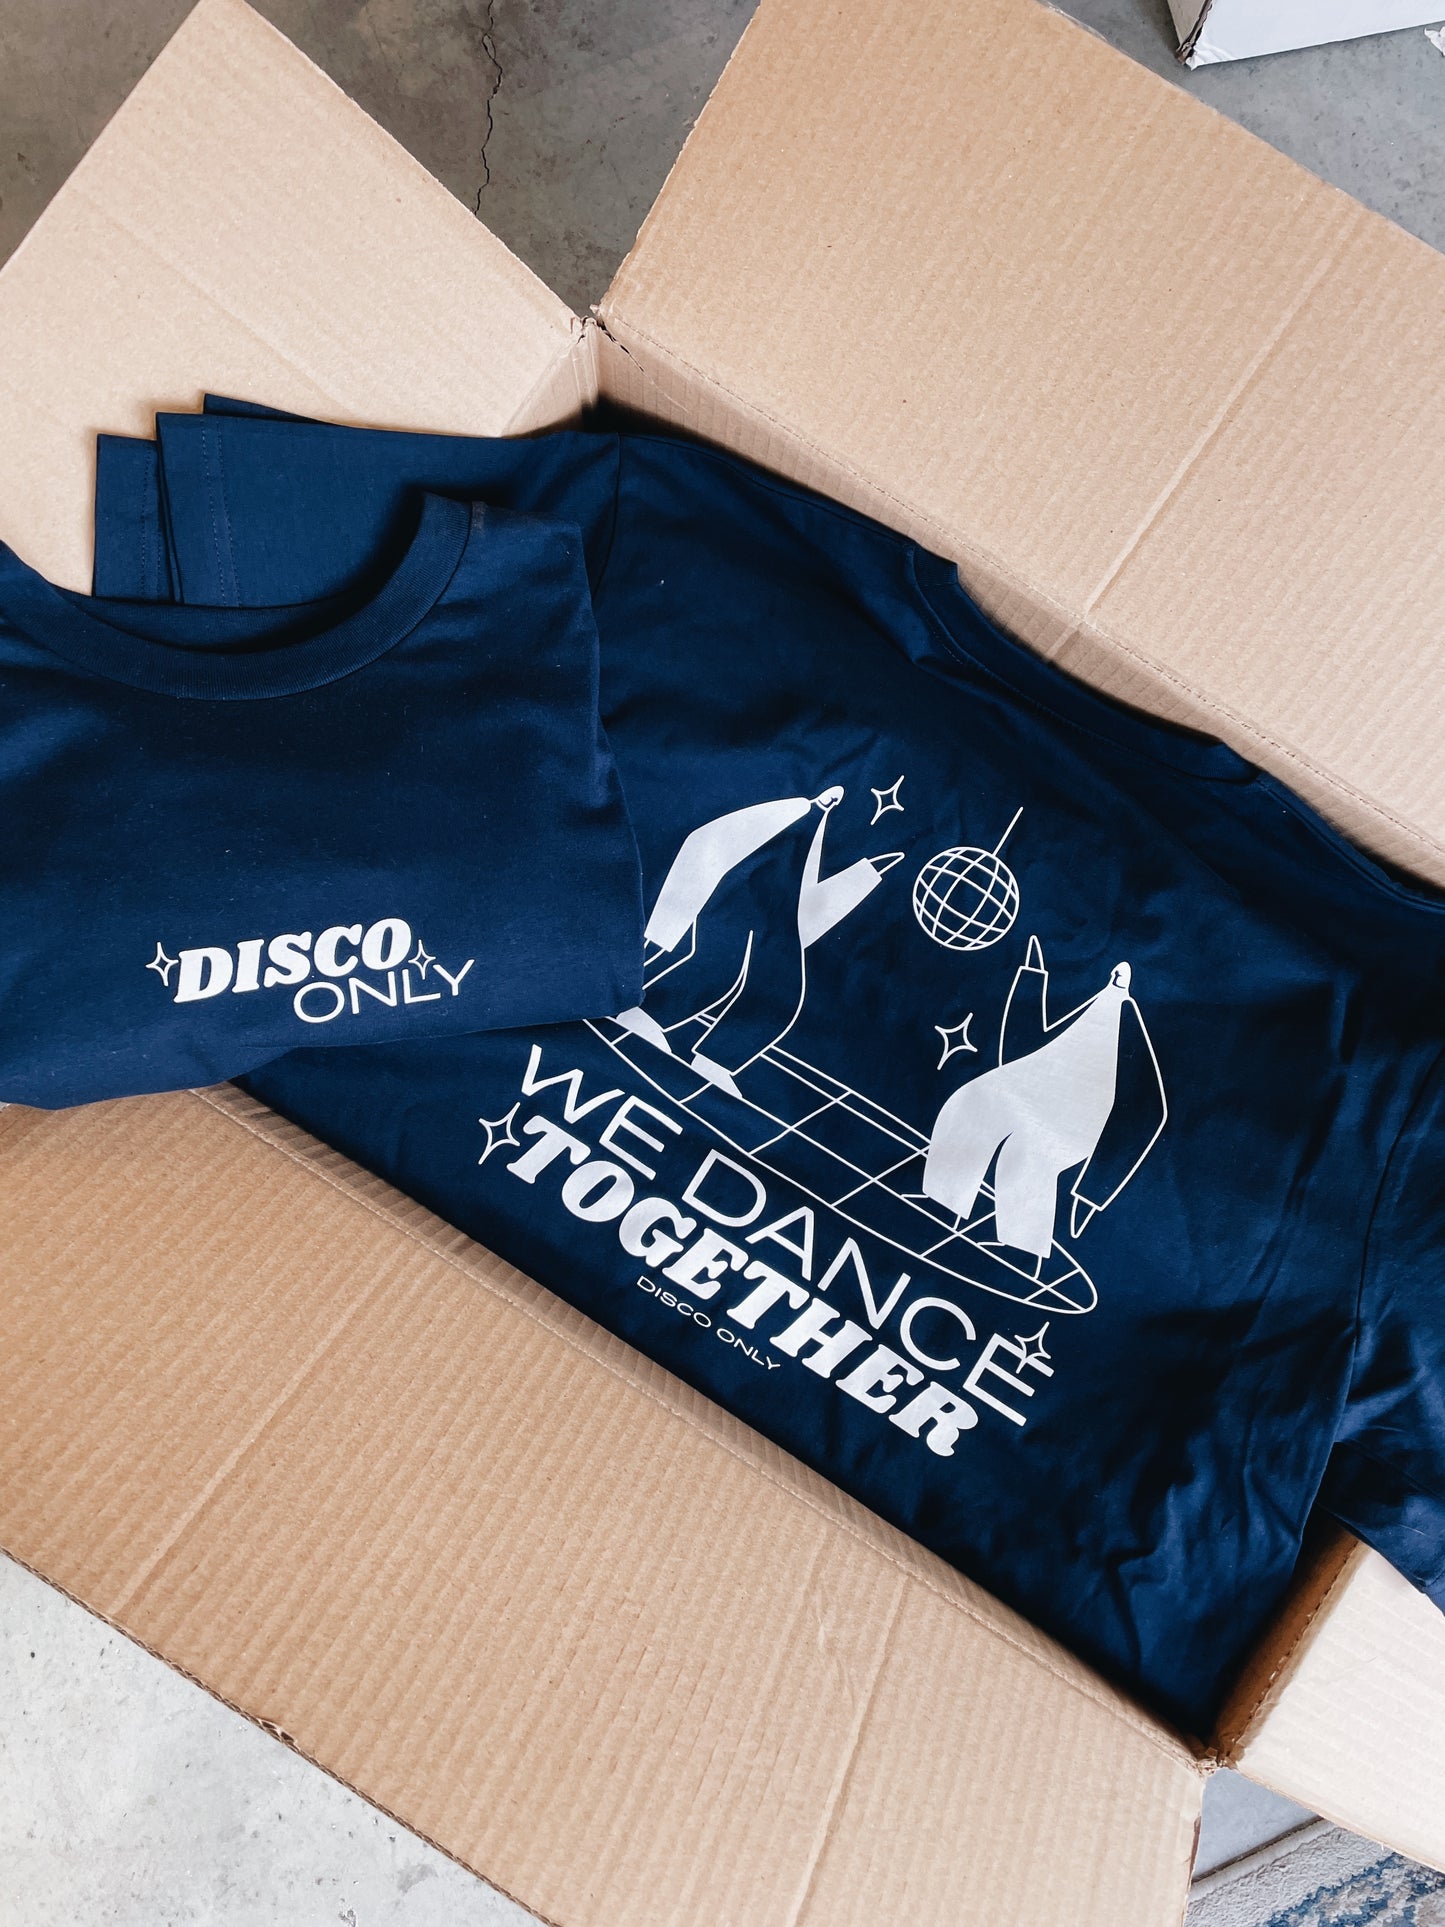 DISCO ONLY 'We Dance Together' Tee - Navy